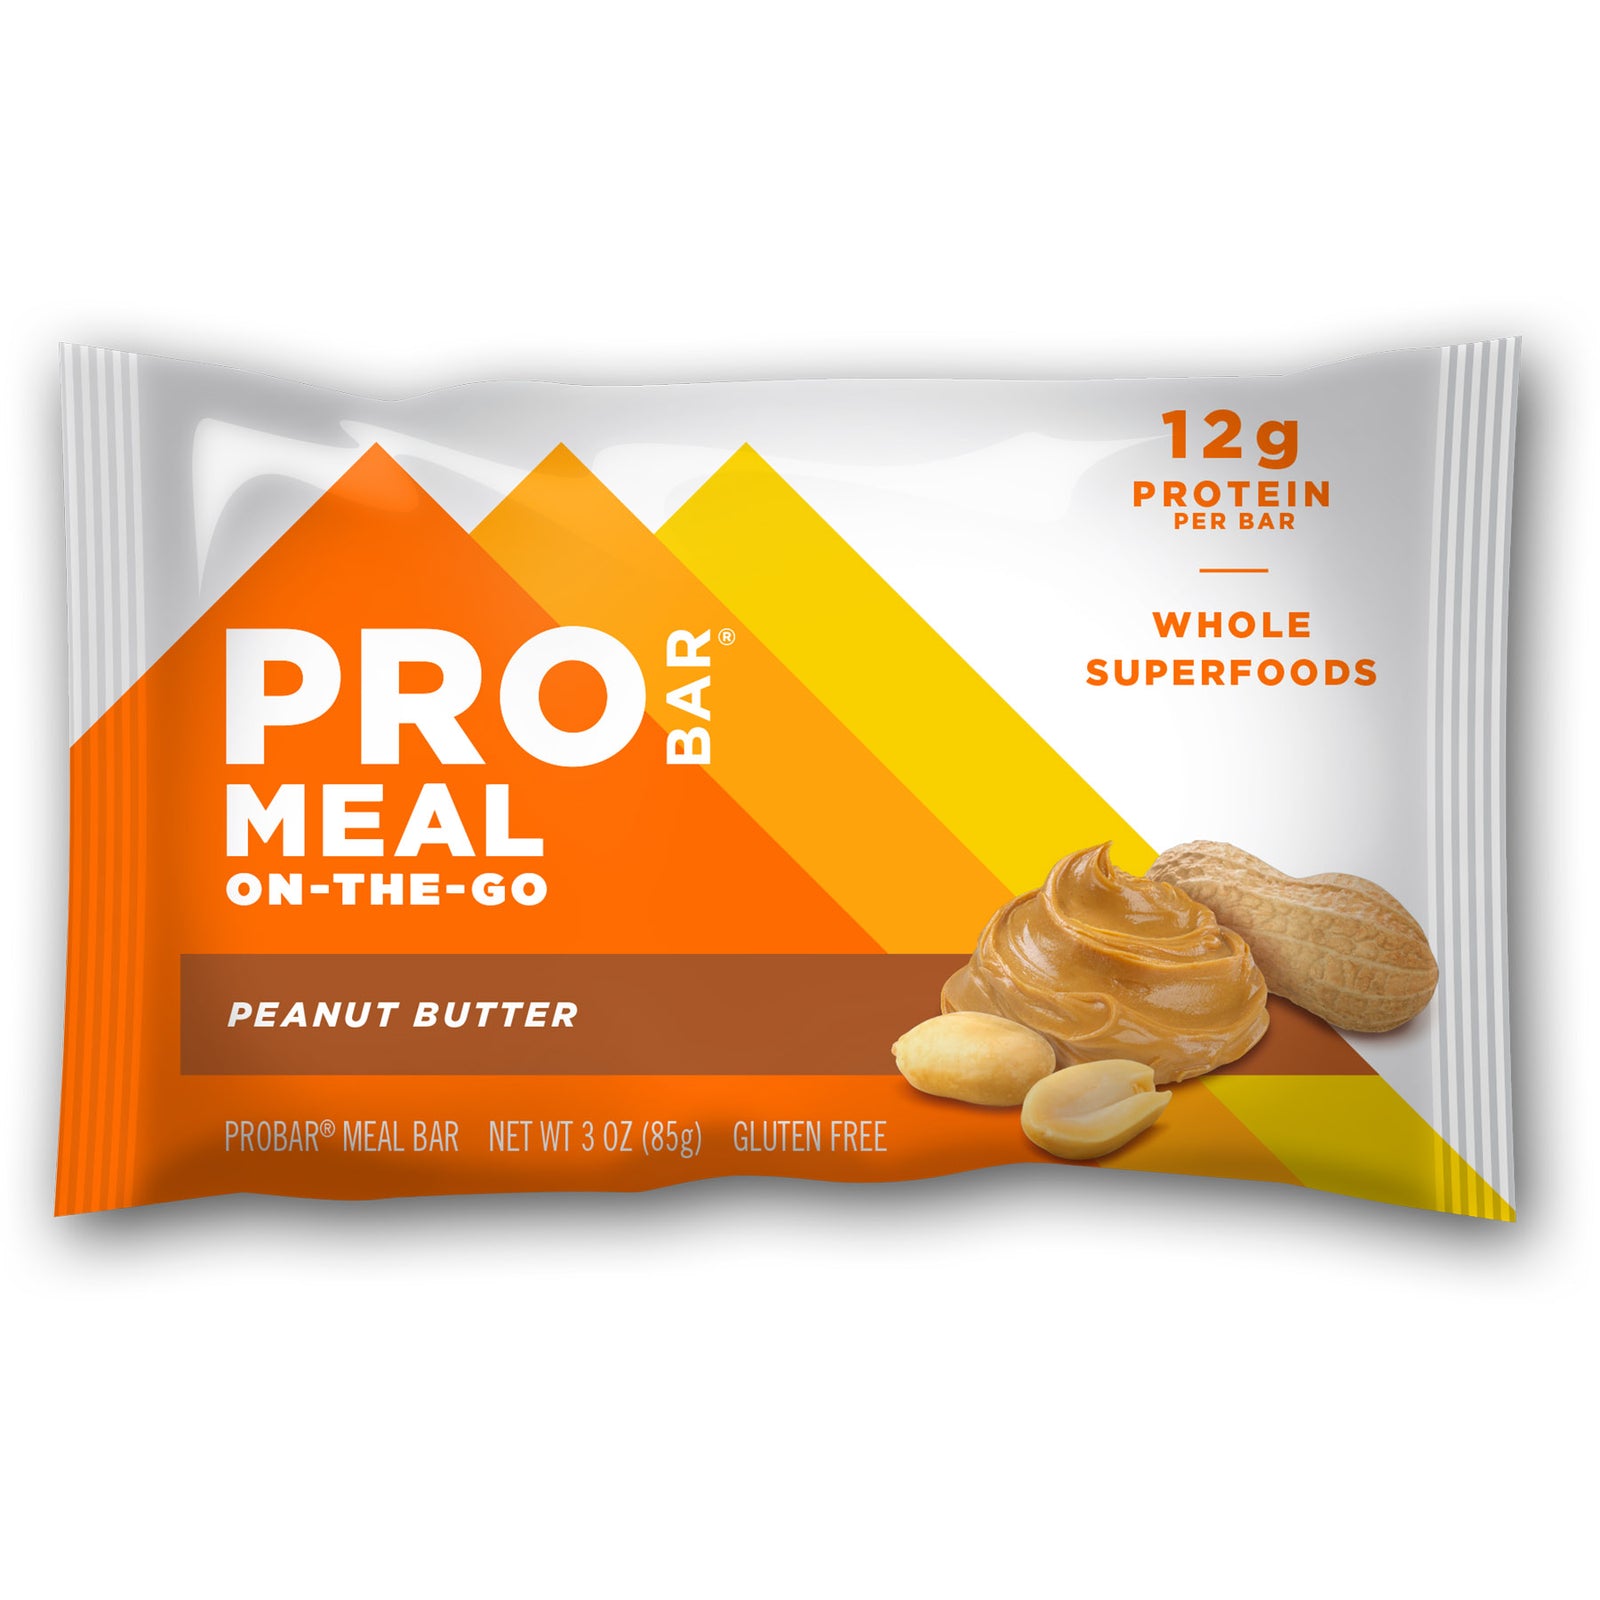 the front of the peanut butter probar package